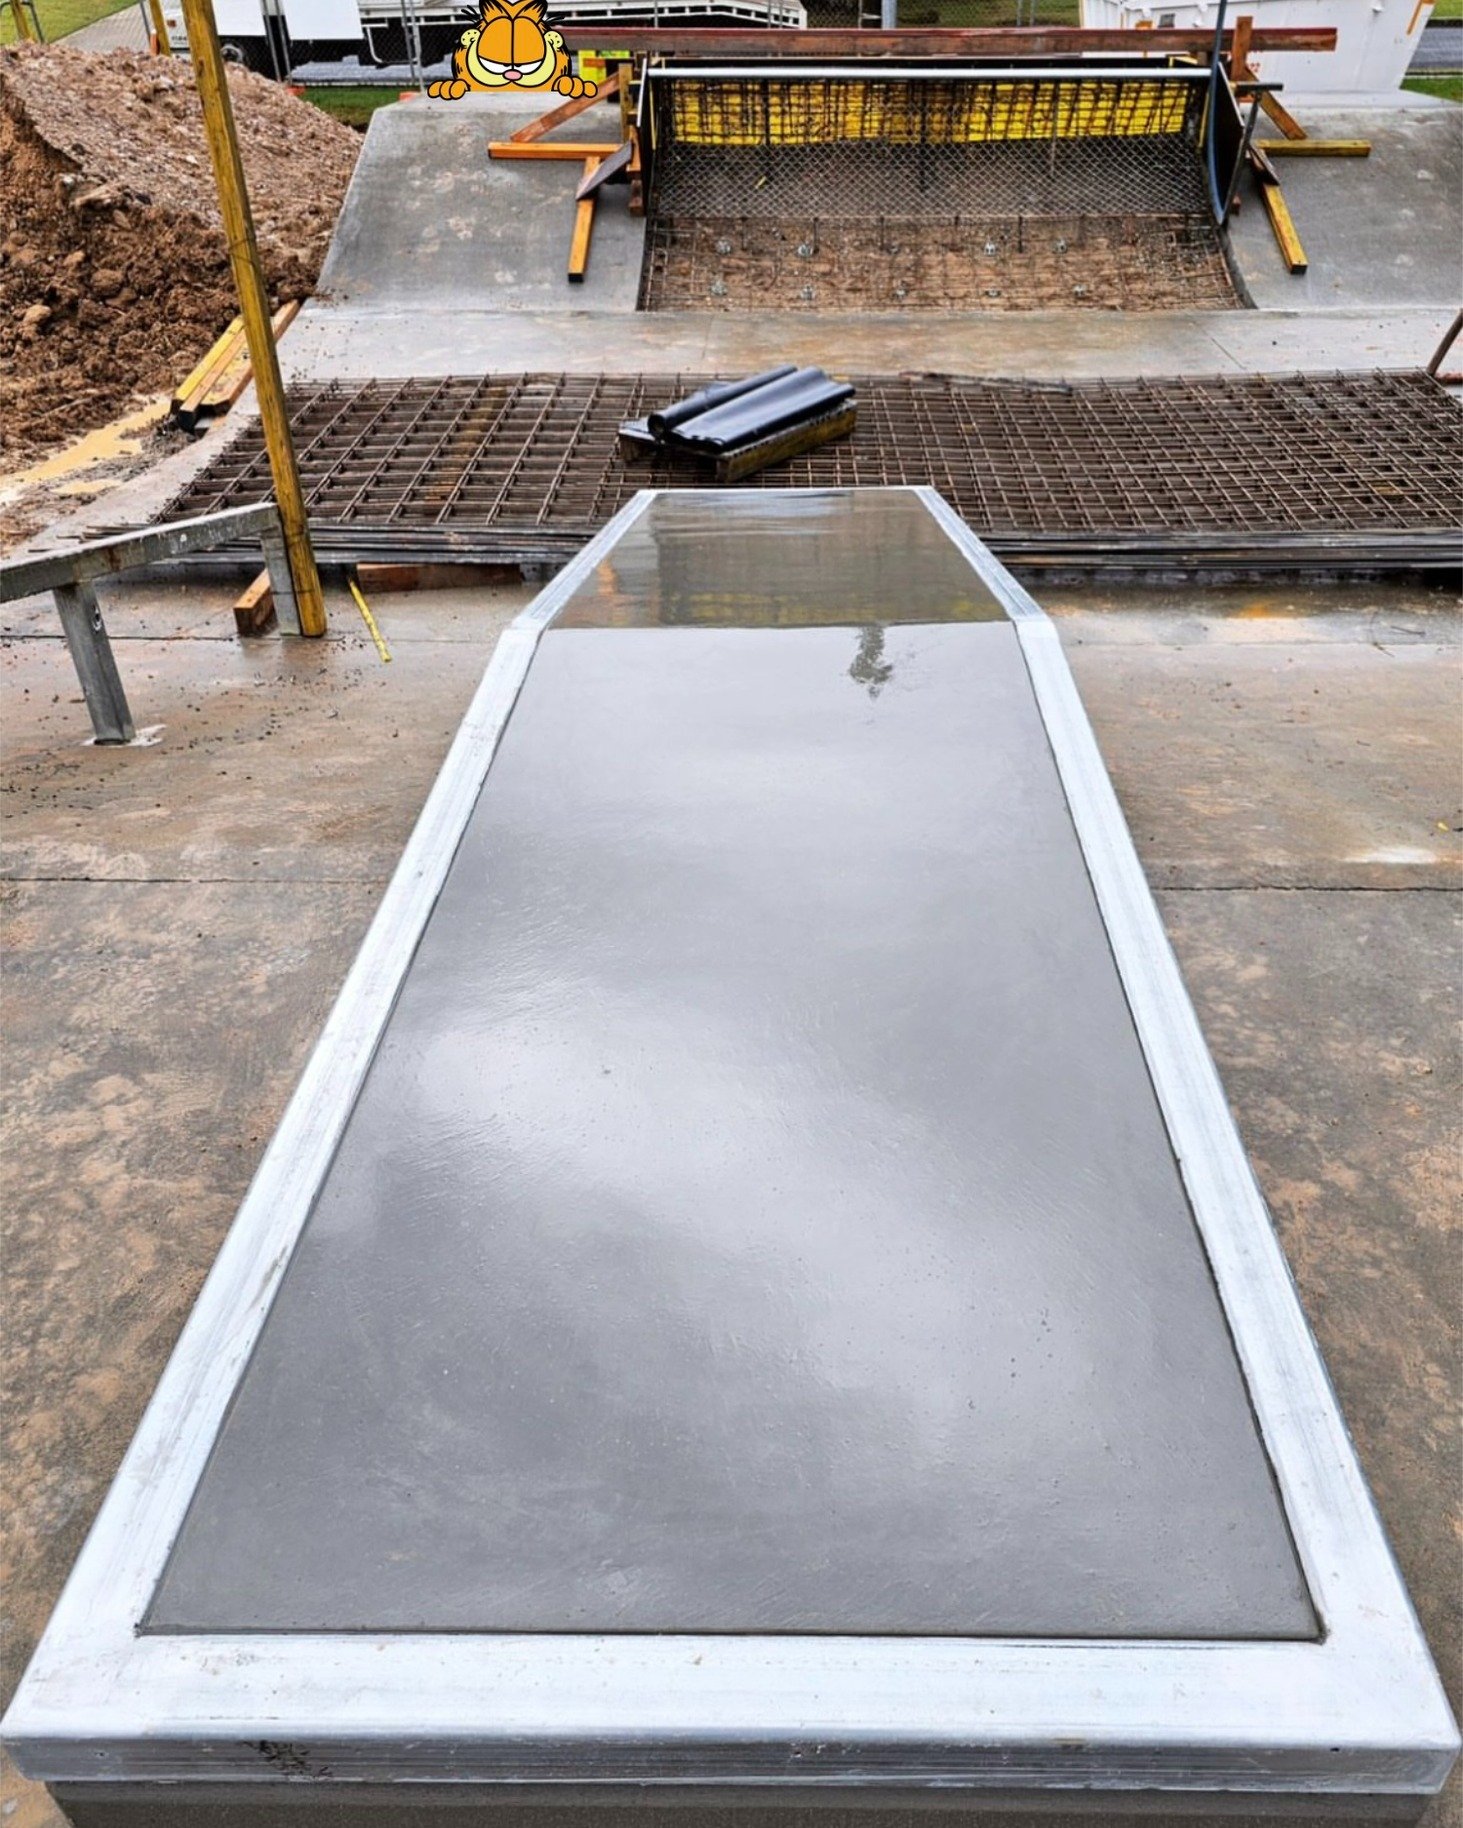 Garfield's new Hubba and out ledge looking glassy! @grindprojects 

#skatepark #skateparkdesign #grindplate #designandconstruct #cardiniashirecouncil